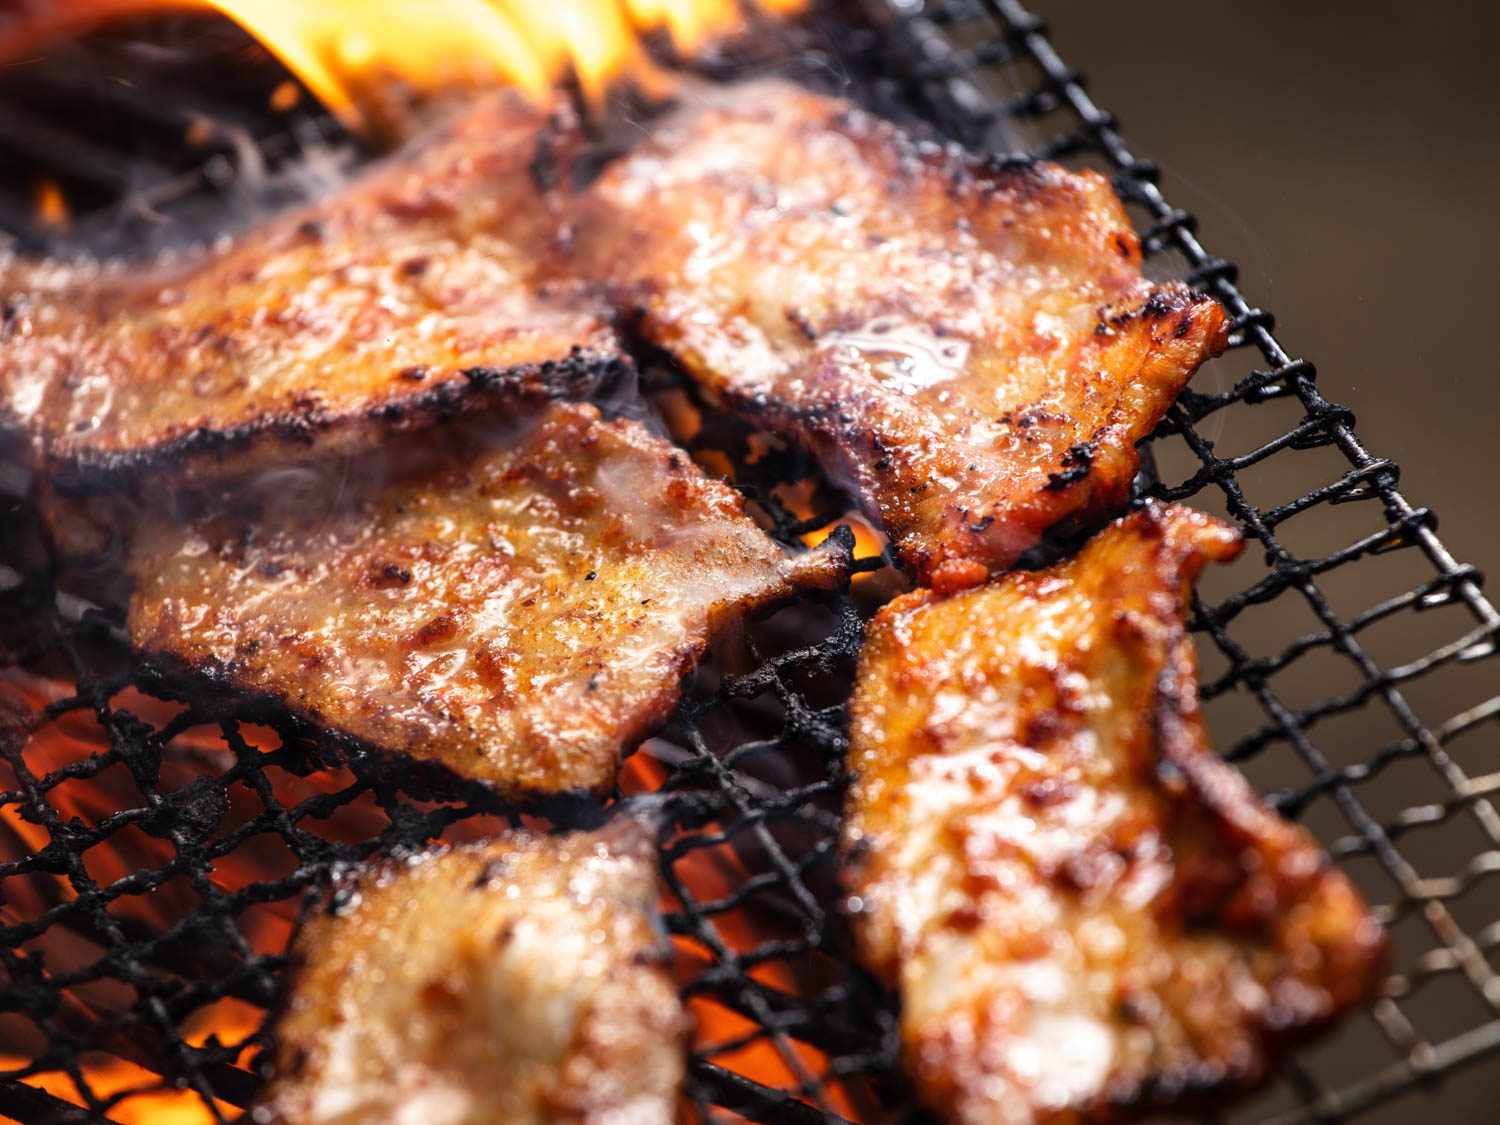 Pieces of pork belly sizzling on the grill.